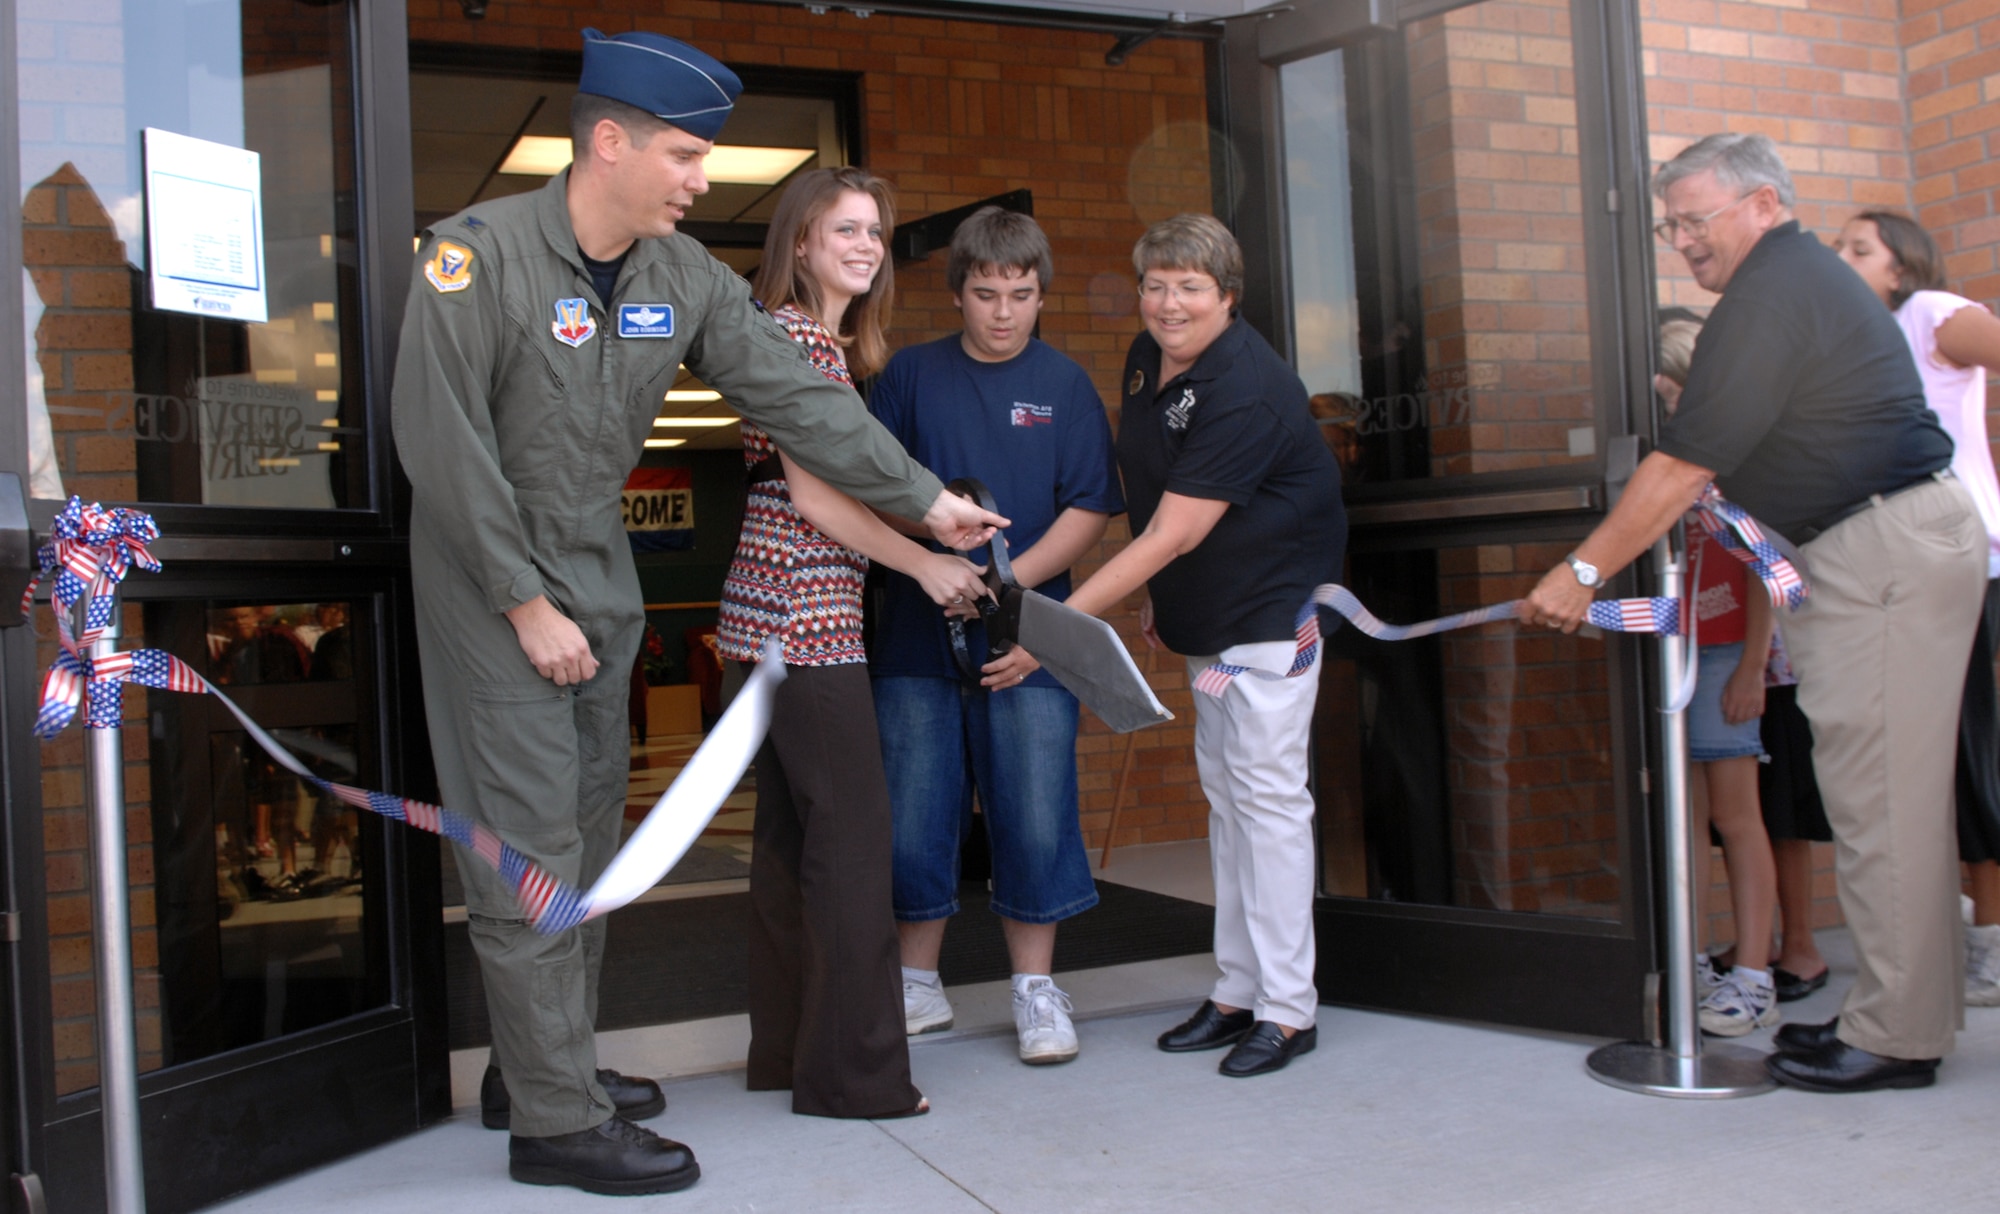 WHITEMAN AIR FORCE BASE, Mo. – Members of Team Whiteman cut the ribbon at the grand opening of the youth center Aug. 24. The $3.9 million youth center consists of a teen center for ages 13-18, three school-age classrooms for before and after school care, a gymnasium, a multi-purpose room, an art room, a music room, a computer room, a game room, a television lounge and instructional classroom. (U.S. Air Force photo/Airman 1st Class Stephen Linch)